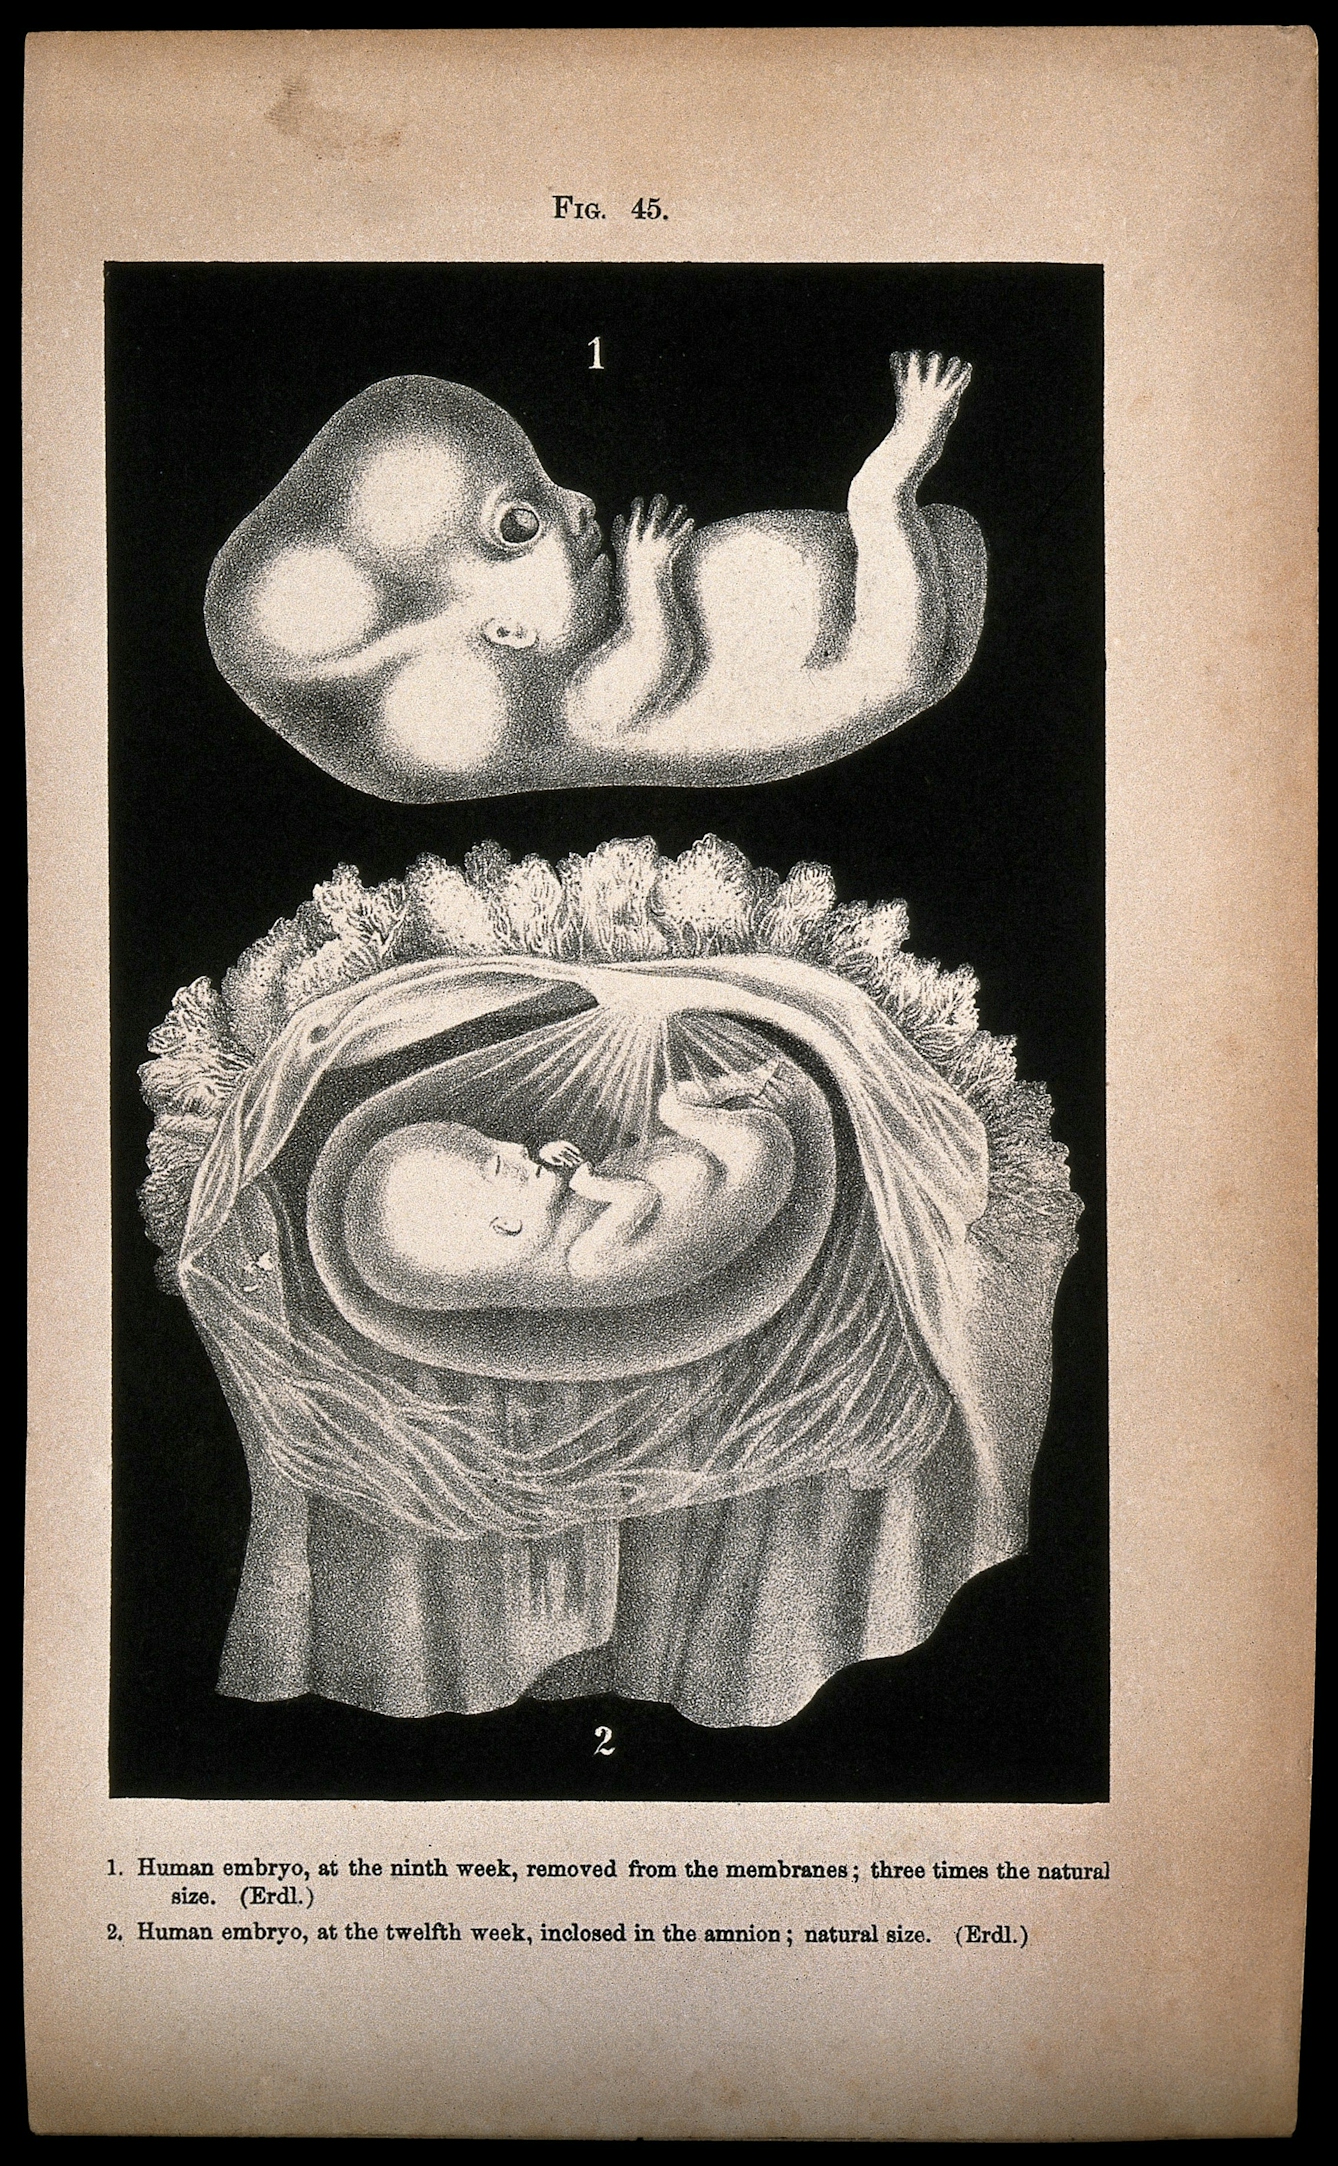 Human embryo, two figures: above, the foetus at nine weeks, below, the foetus at twelve weeks, shown enclosed in the amnion. Lithograph after Erdl, 1850/1900?